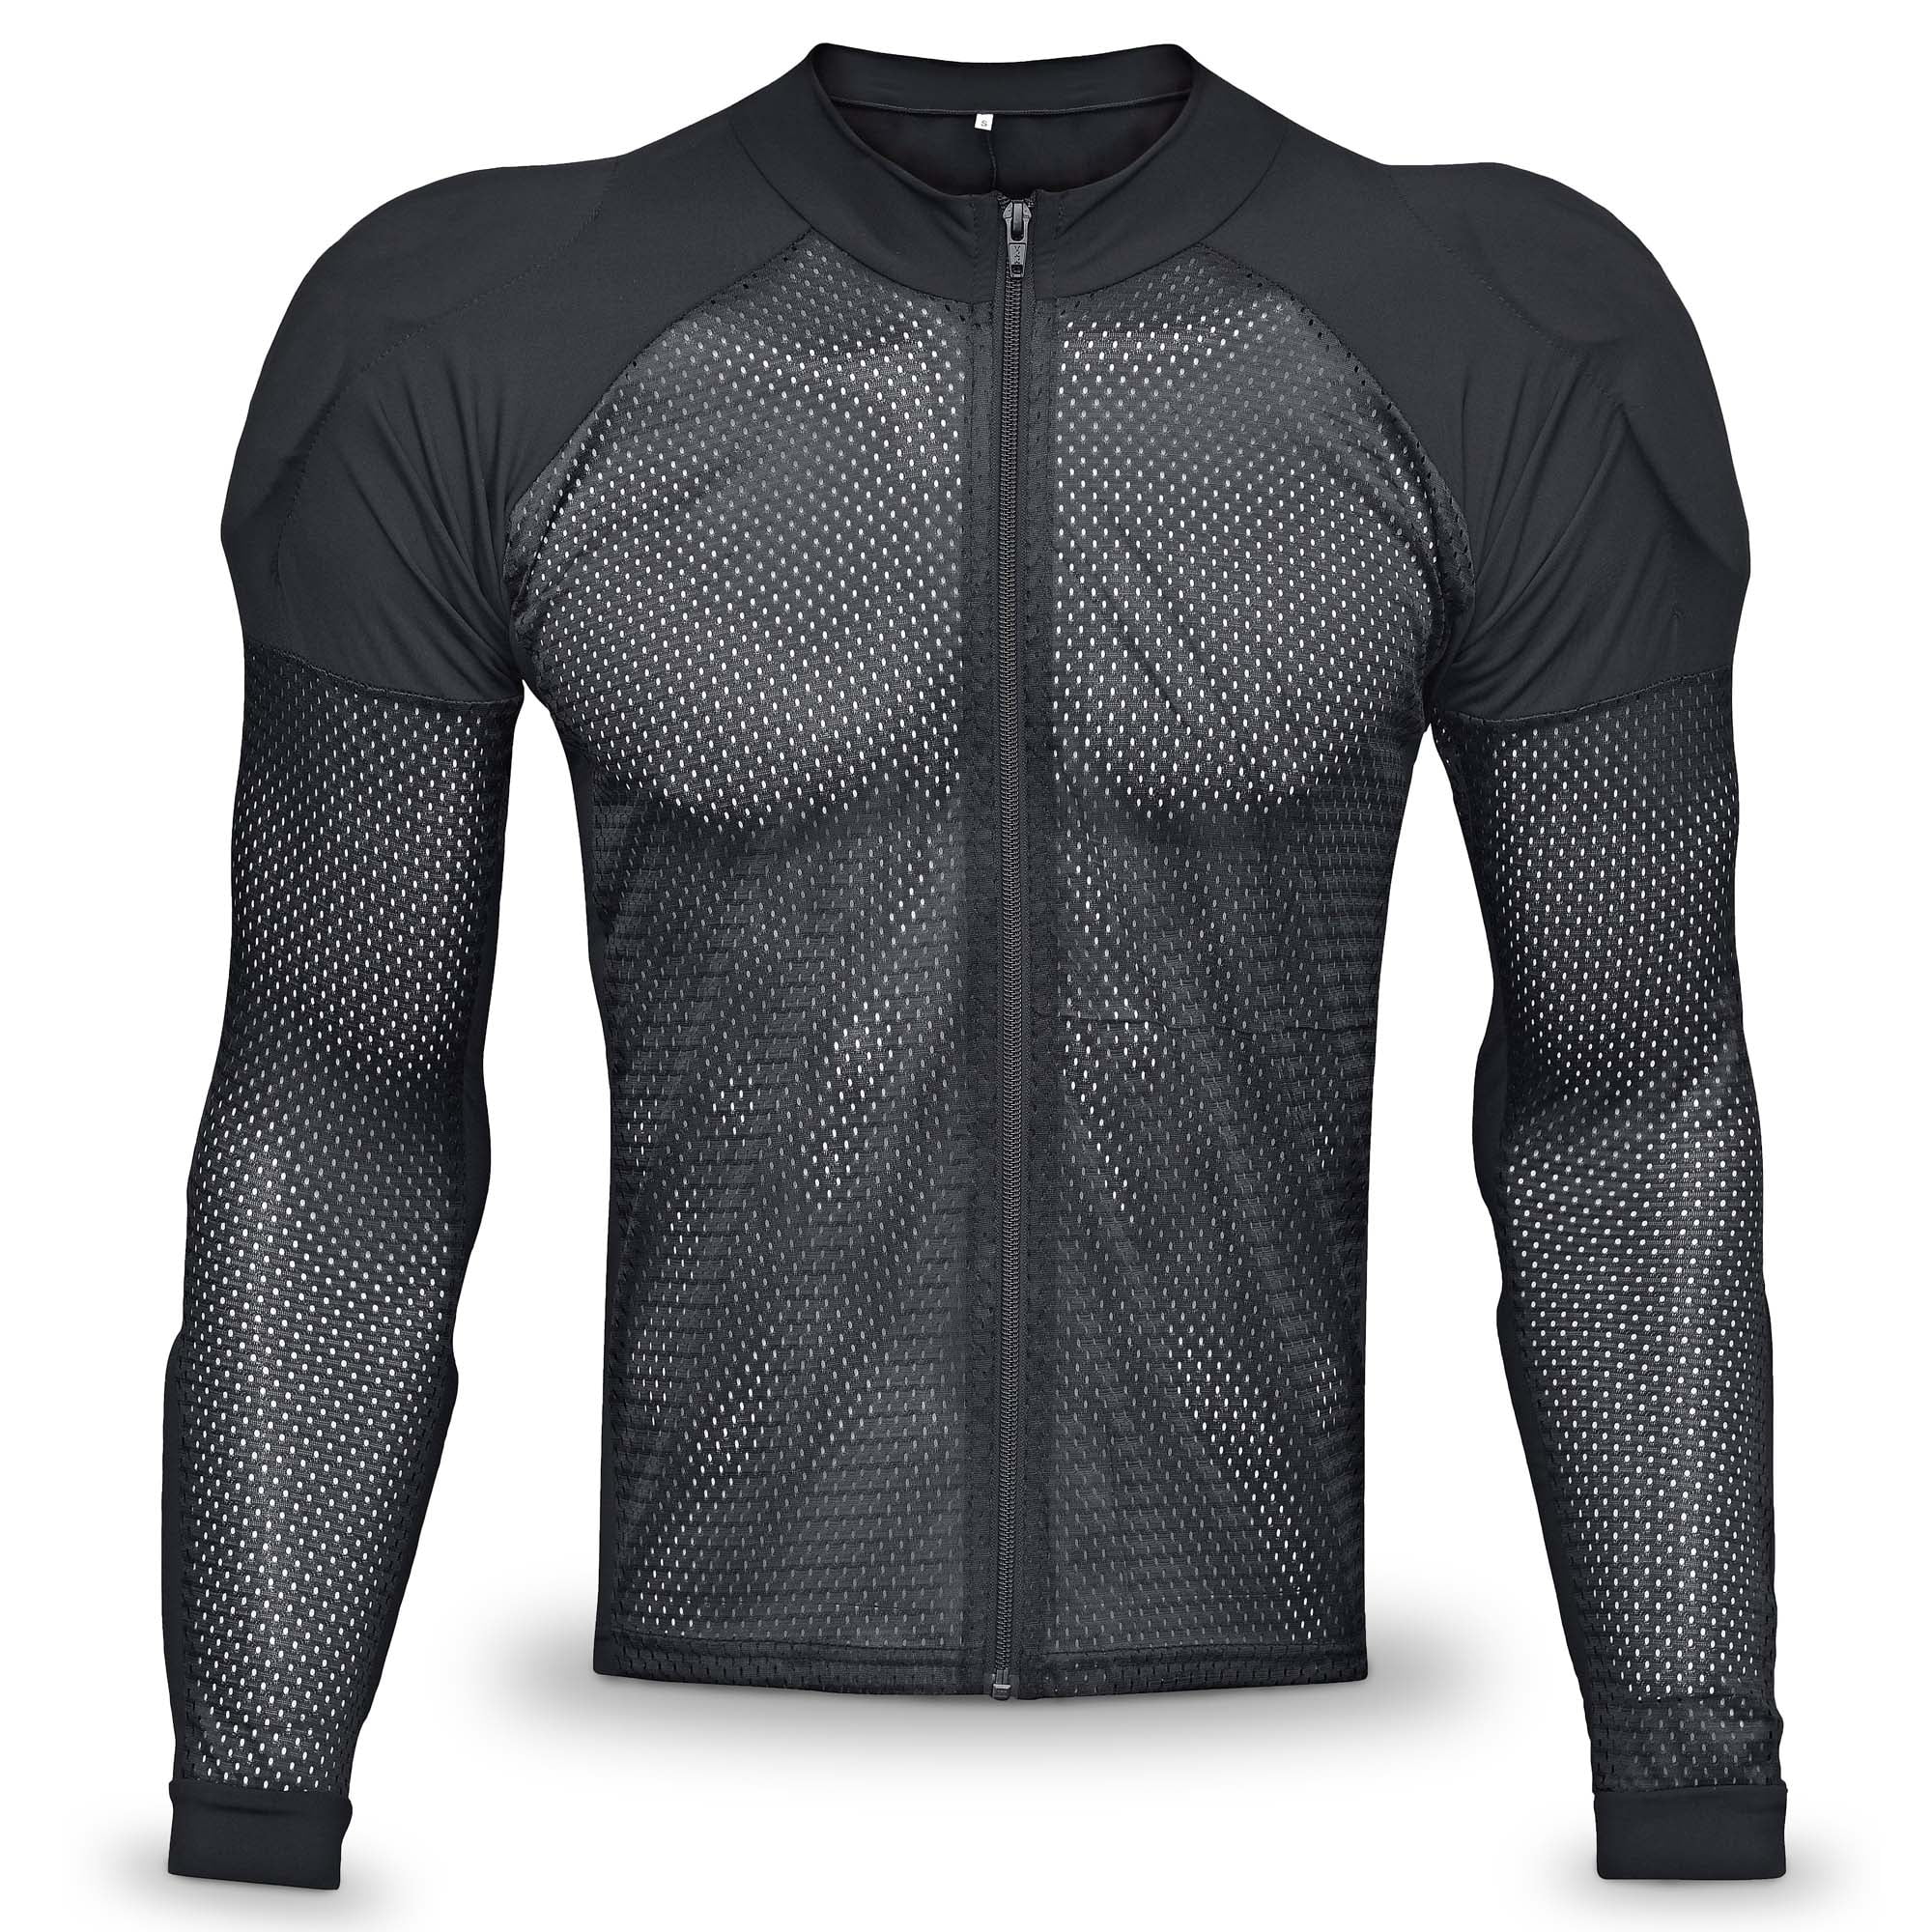 WICKED STOCK Potomac Protective Riding Shirt Armored CE Level 1 Mesh All  season